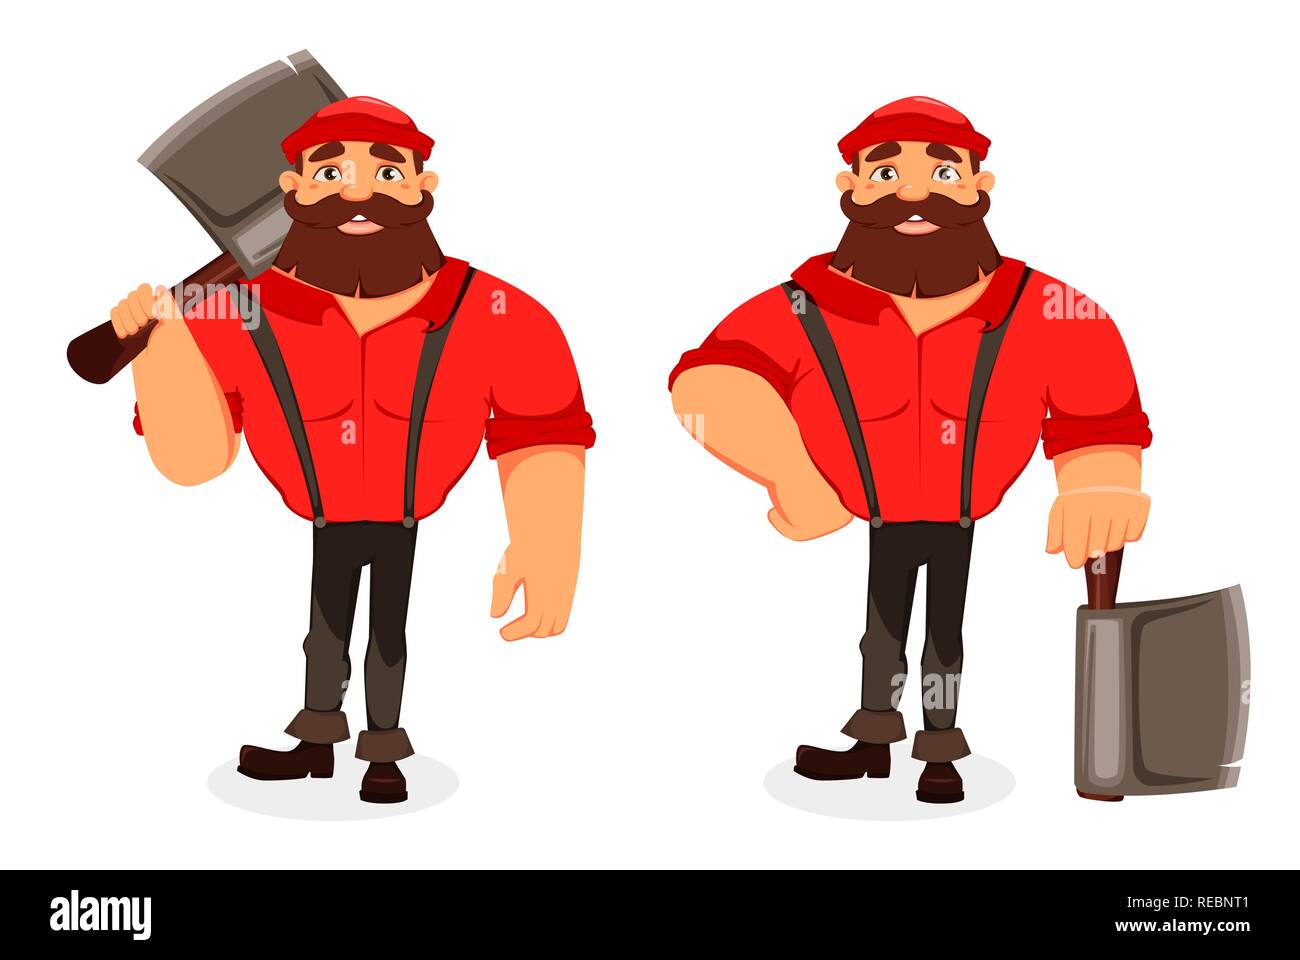 Lumberjack cartoon character, set of two poses. Handsome logger holding big axe. Vector illustration on white background. Stock Vector